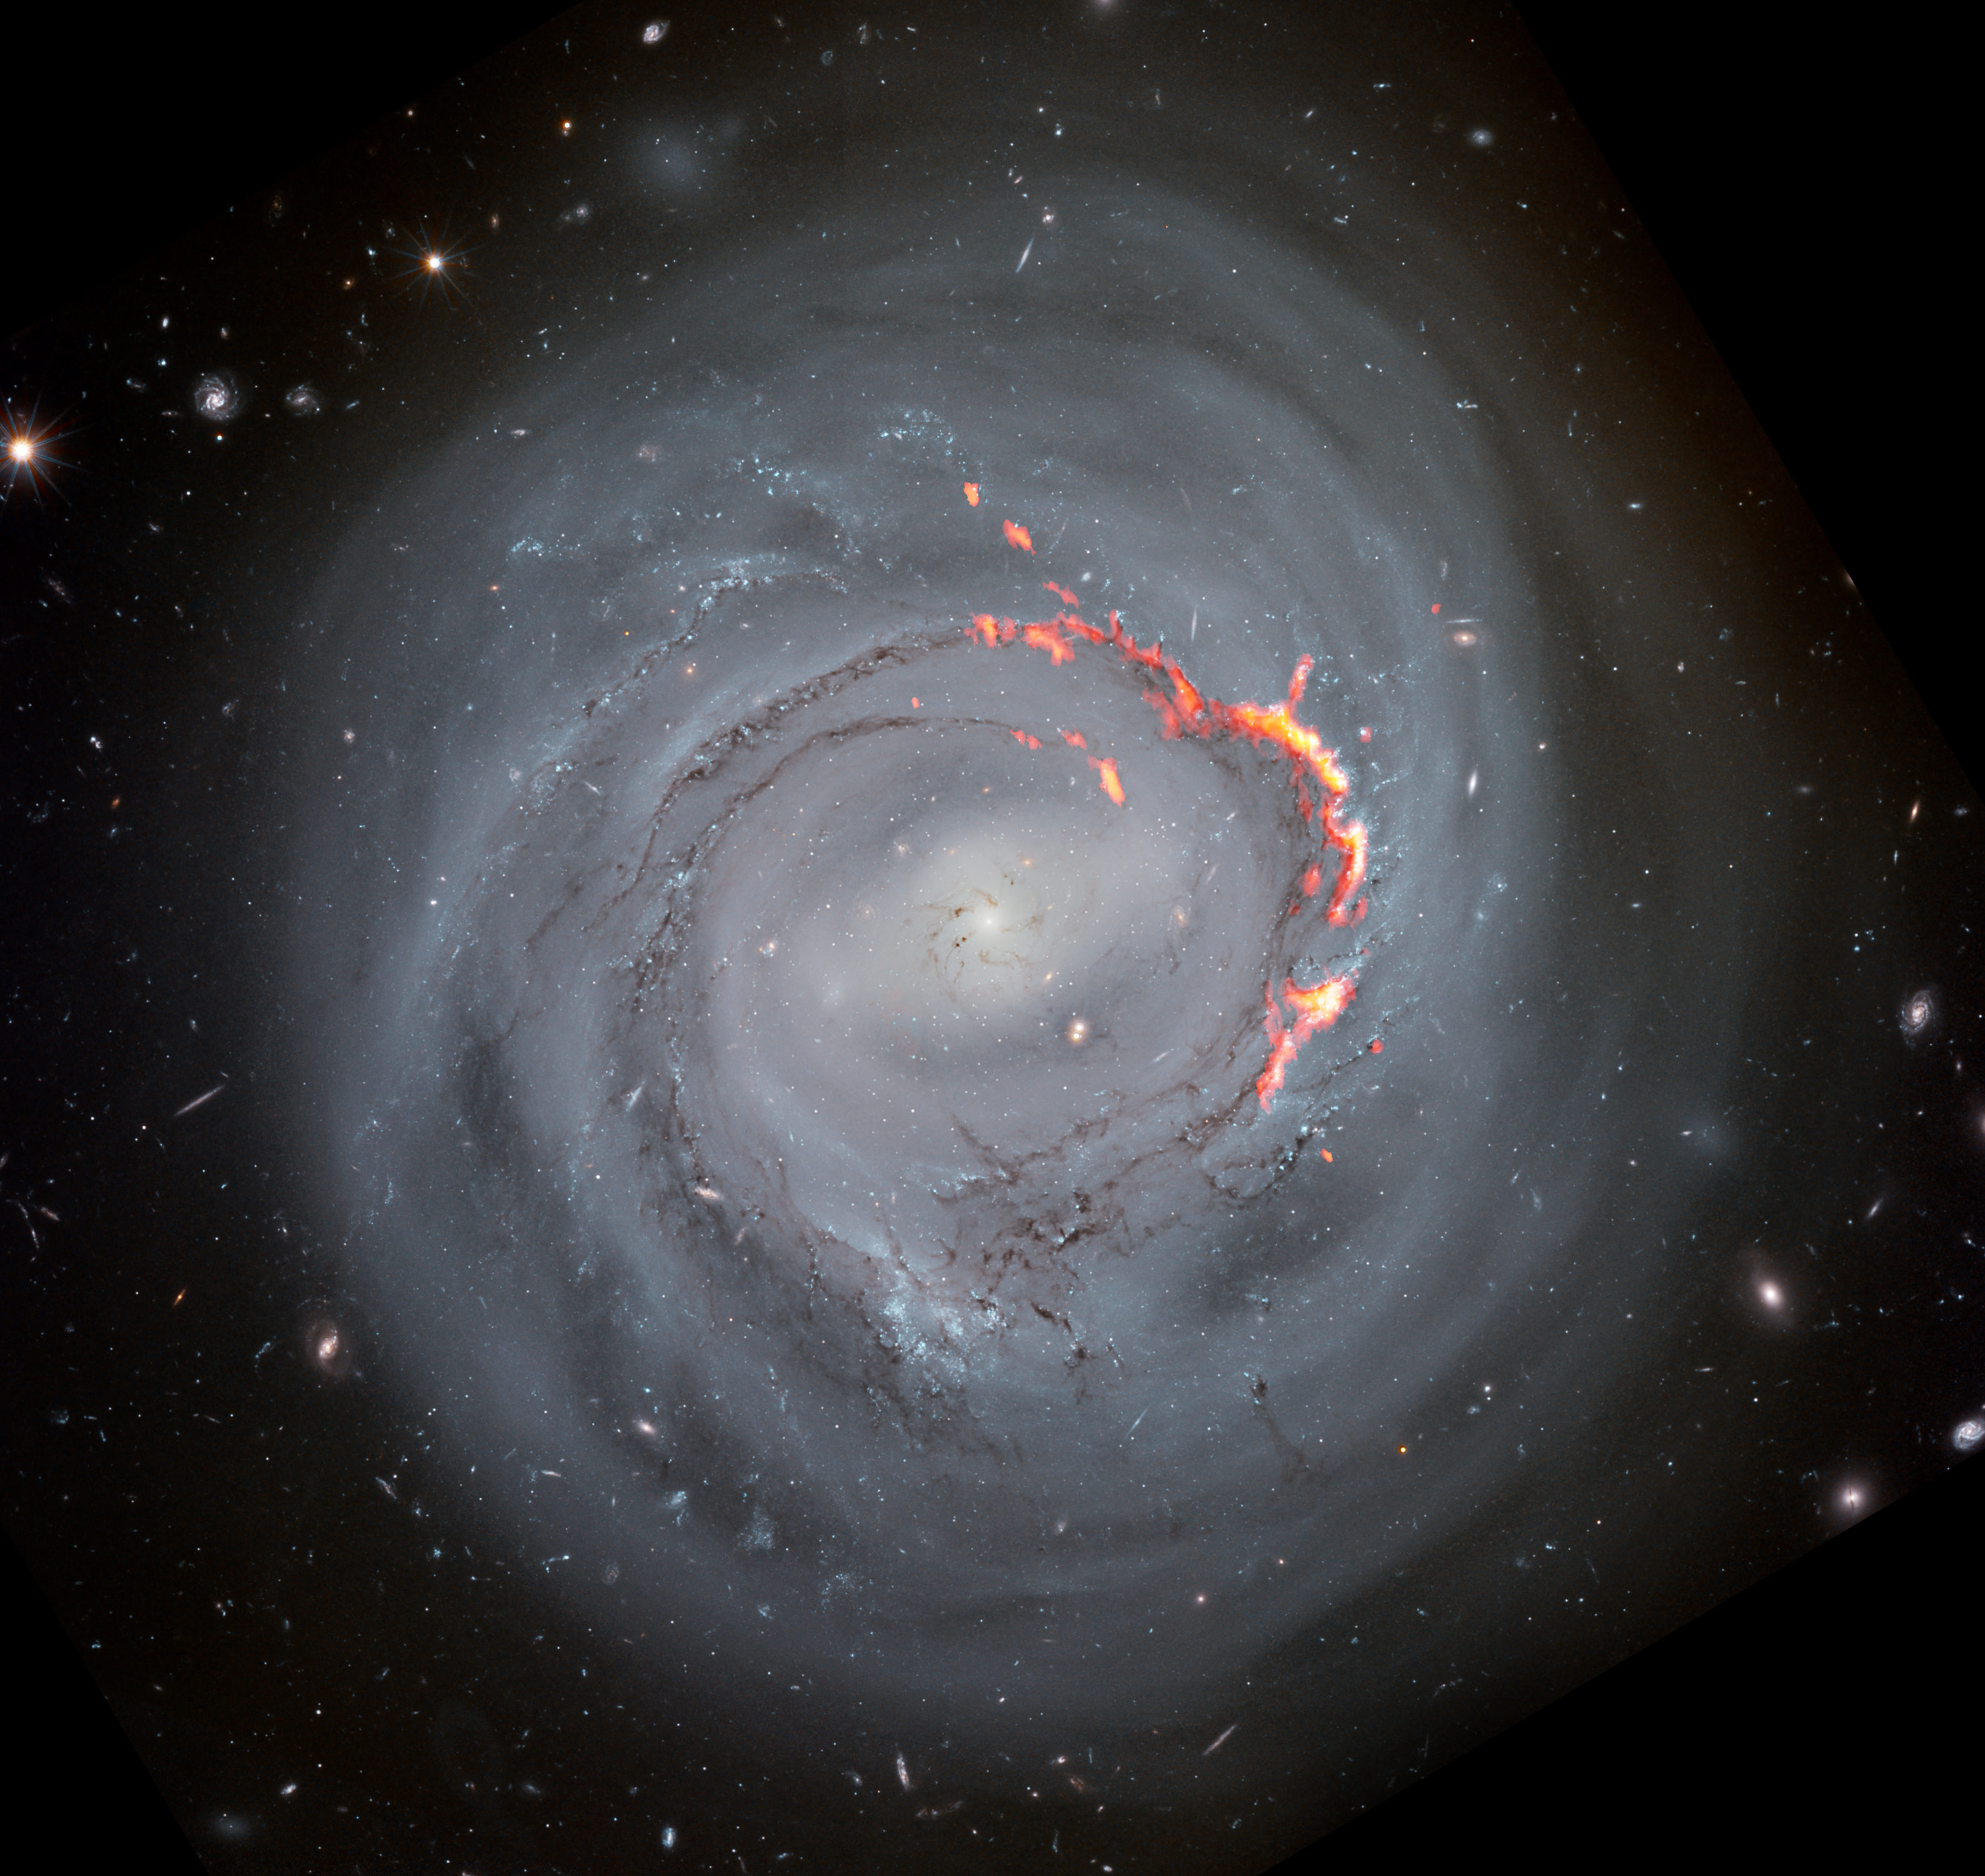 Shown here in composite view, ALMA data (red/orange) reveals filament structures left behind by ram pressure stripping in a Hubble Space Telescope optical view of NGC4921. Scientists believe that these filaments are formed as magnetic fields in the galaxy prevent some matter from being stripped away. Credit: ALMA (ESO/NAOJ/NRAO)/S. Dagnello (NRAO), NASA/ESA/Hubble/K. Cook (LLNL), L. Shatz